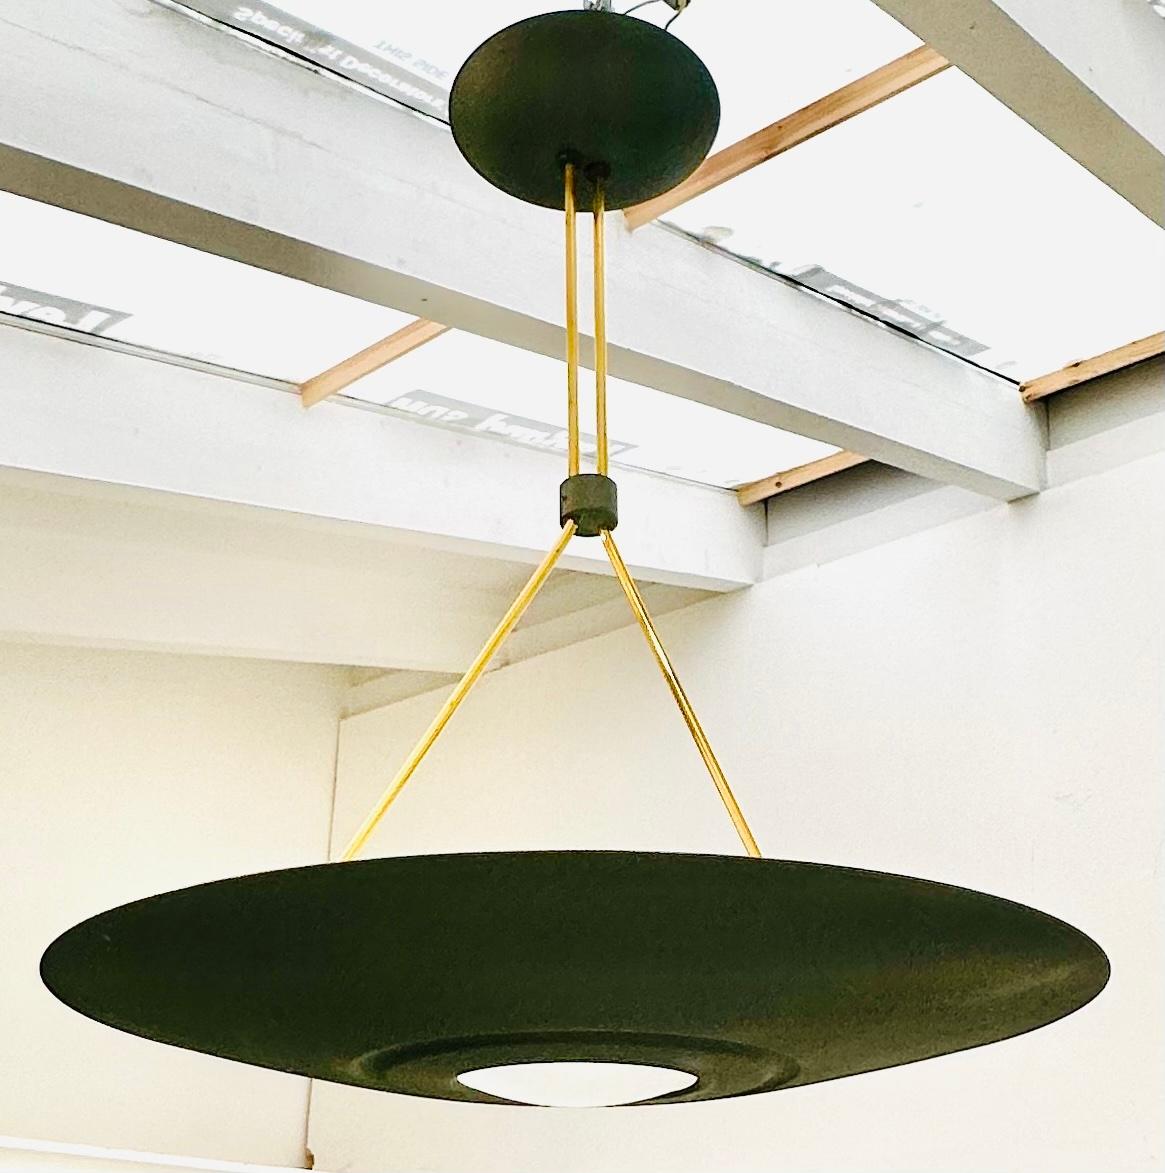 1980s French UFO-shaped, space age, directional uplighter halogen ceiling light.  Manufactured by L G Paris. The metal curved shade is coated with a dark green textured enamel coating on the outside with a matching ceiling cup with the same coating.